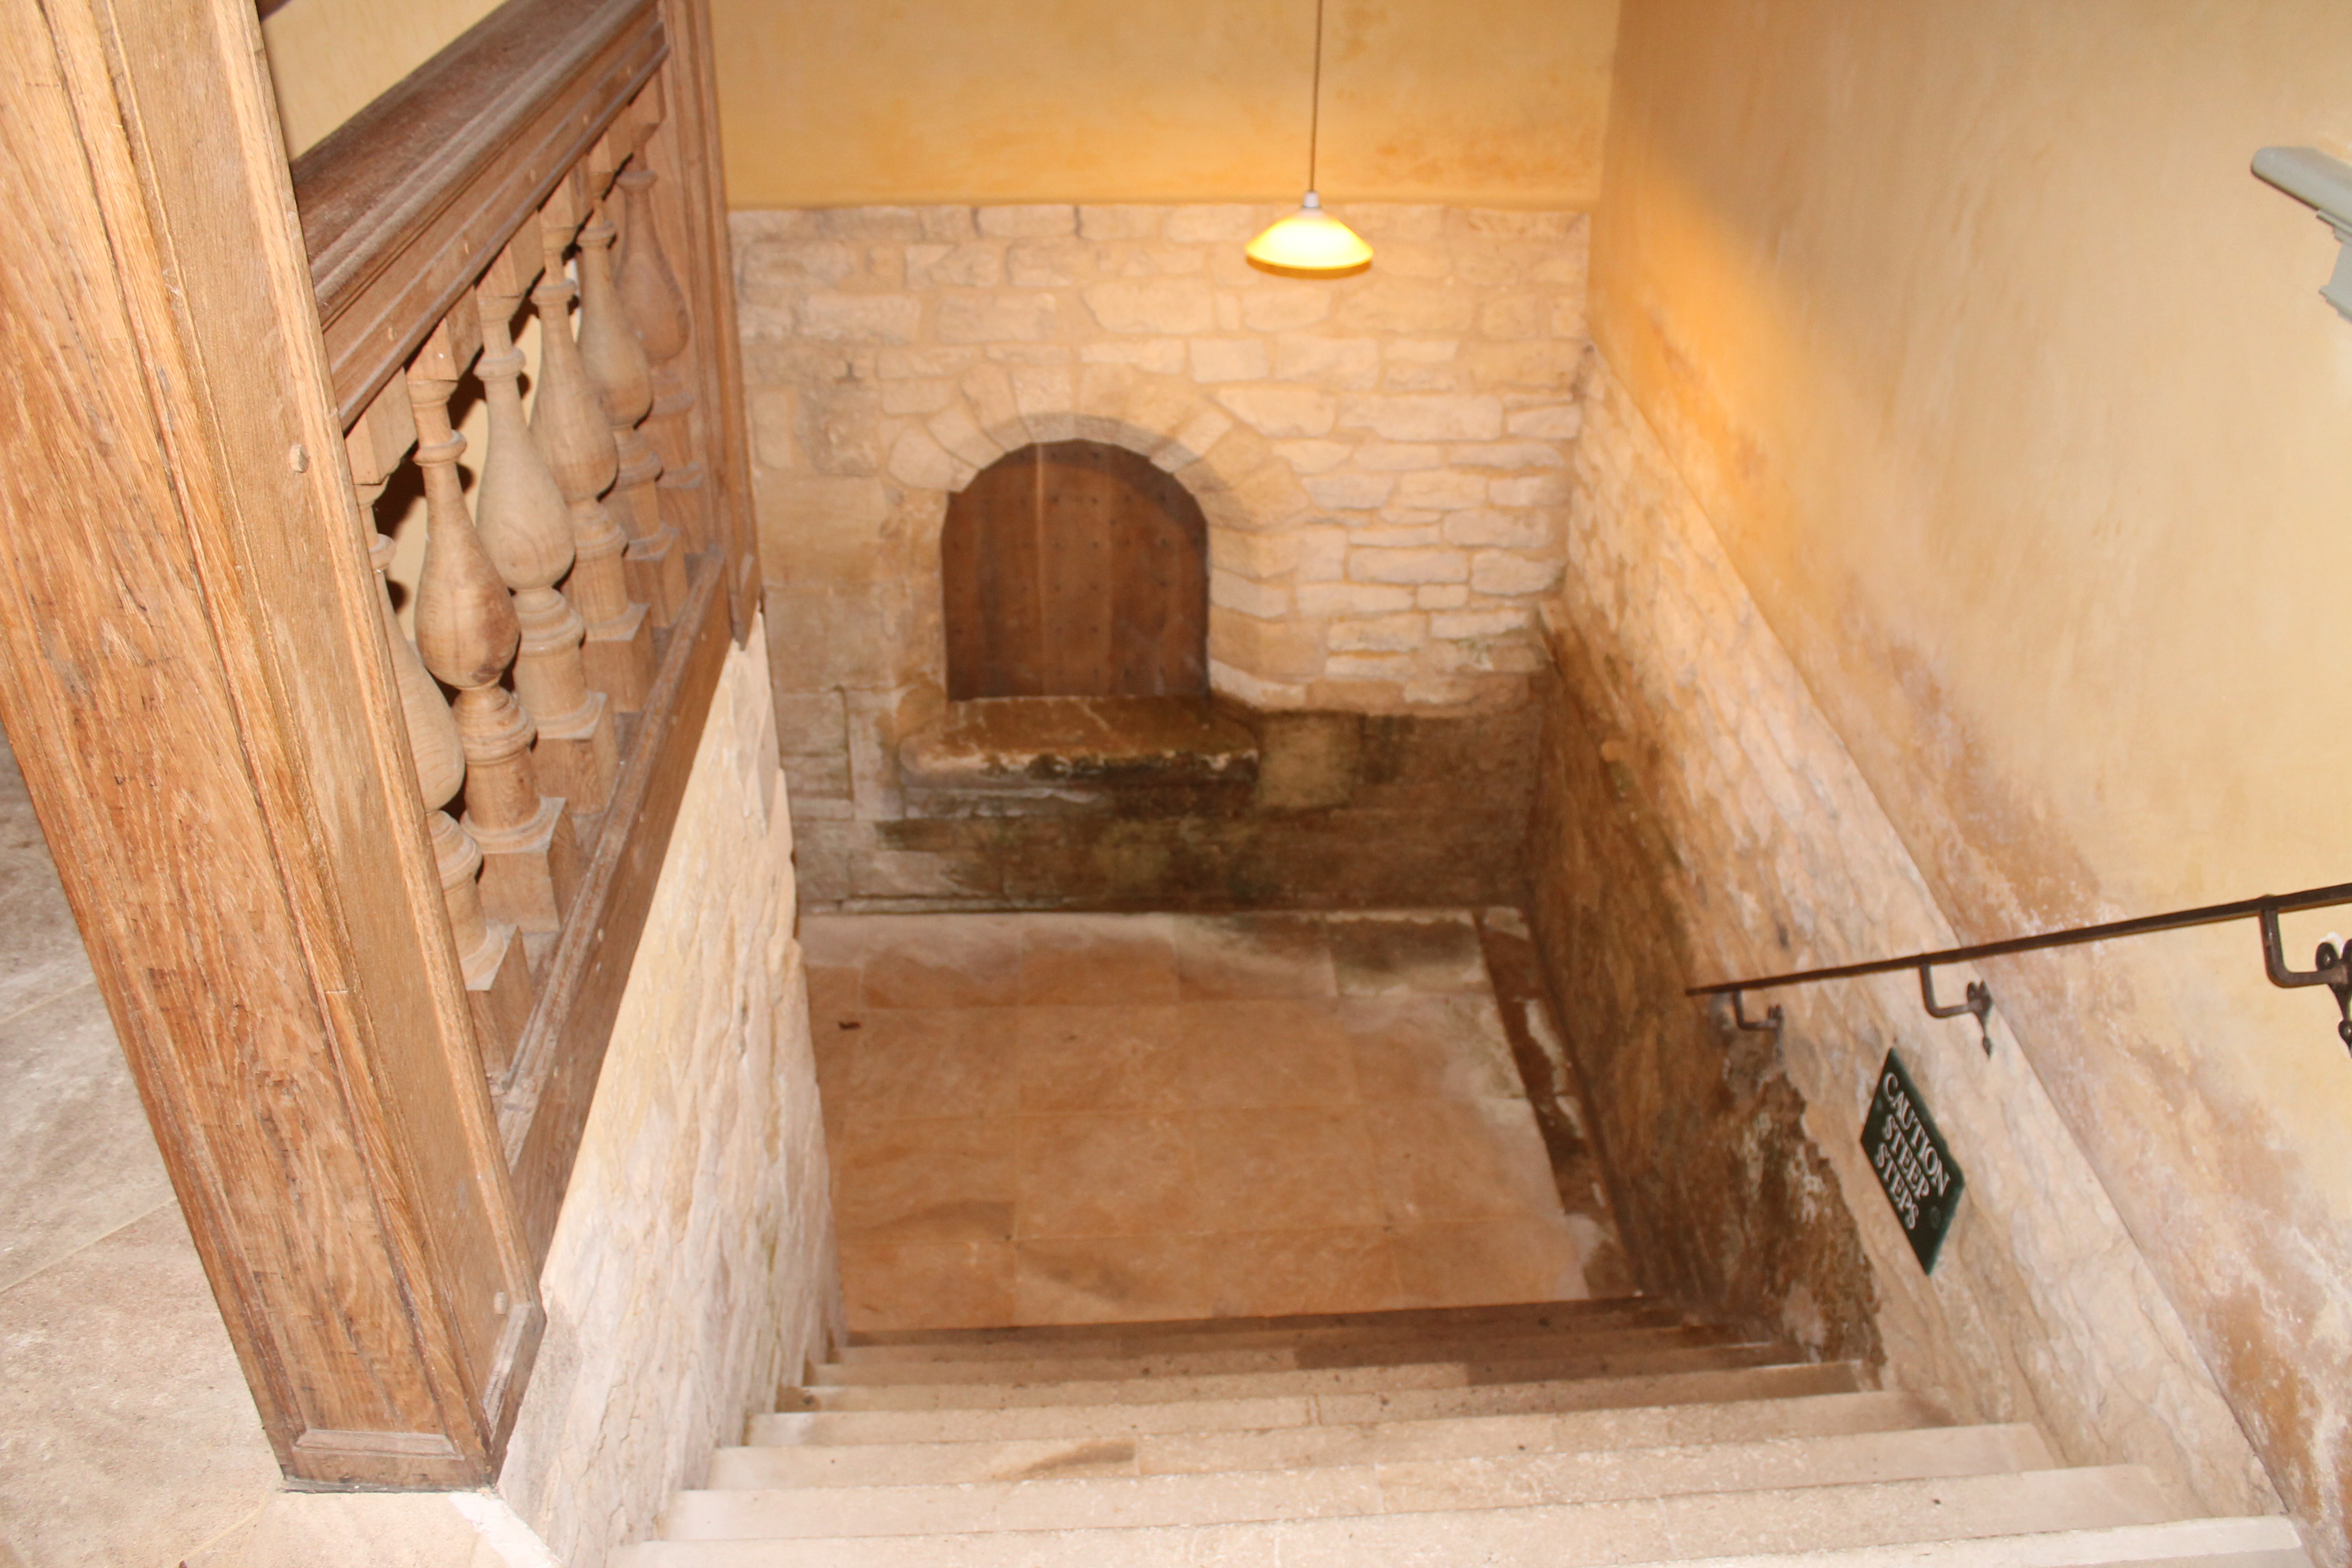 The stairs down to the 17th century basement kitchen infilled about 100 years ago and dug out again in the 1990s when Lodge Park was restored.